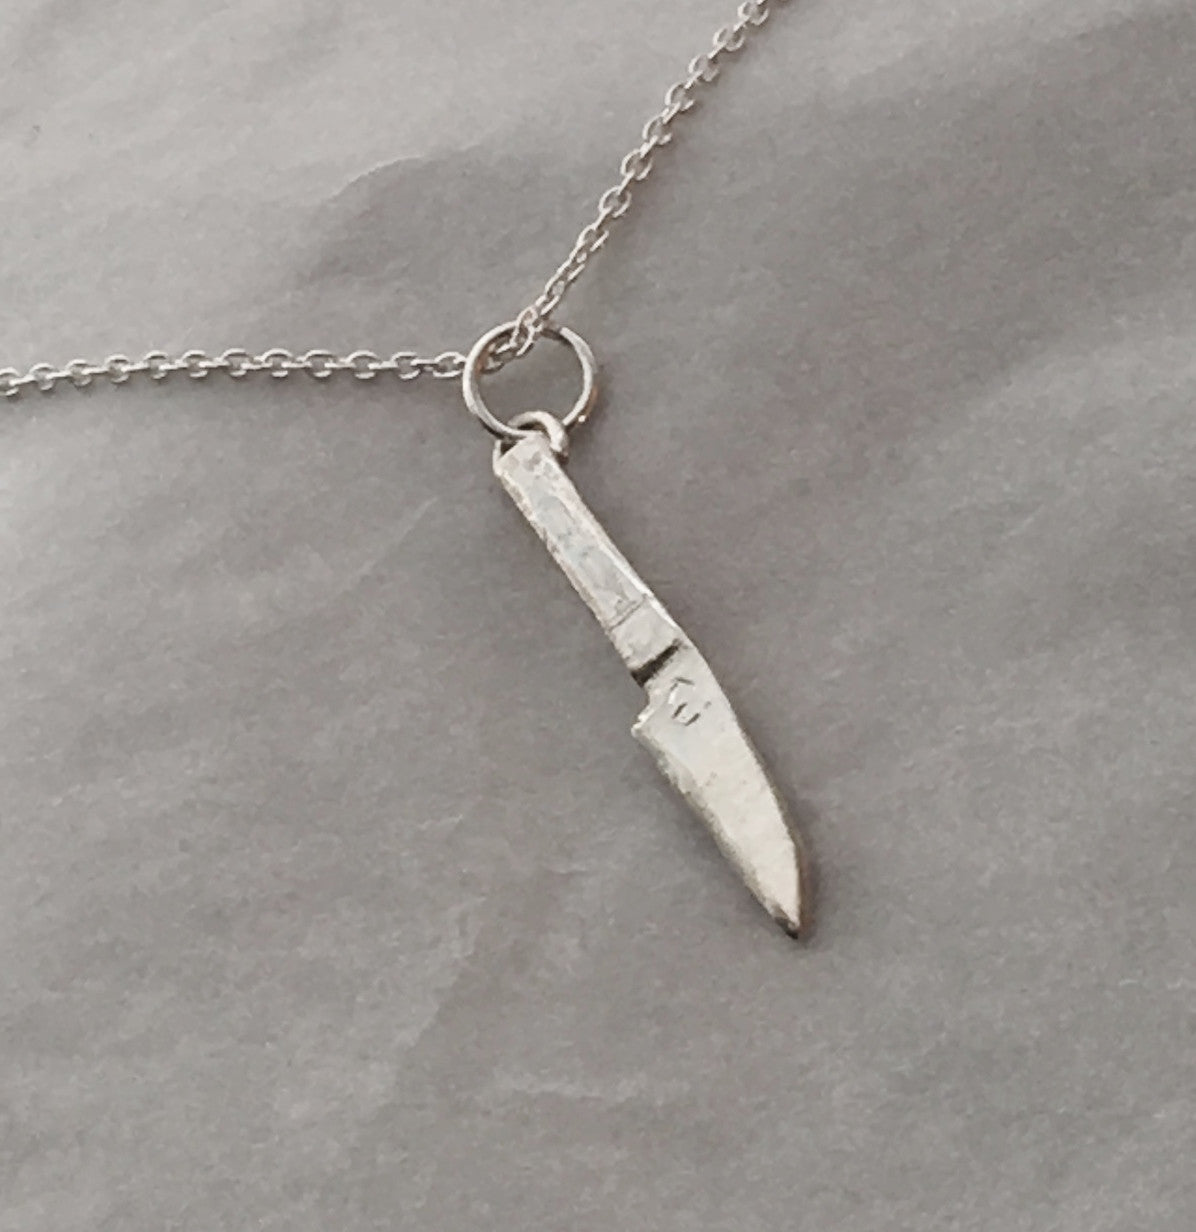 Sushi Knife Pendant Necklace in Sterling Silver with Cable Chain